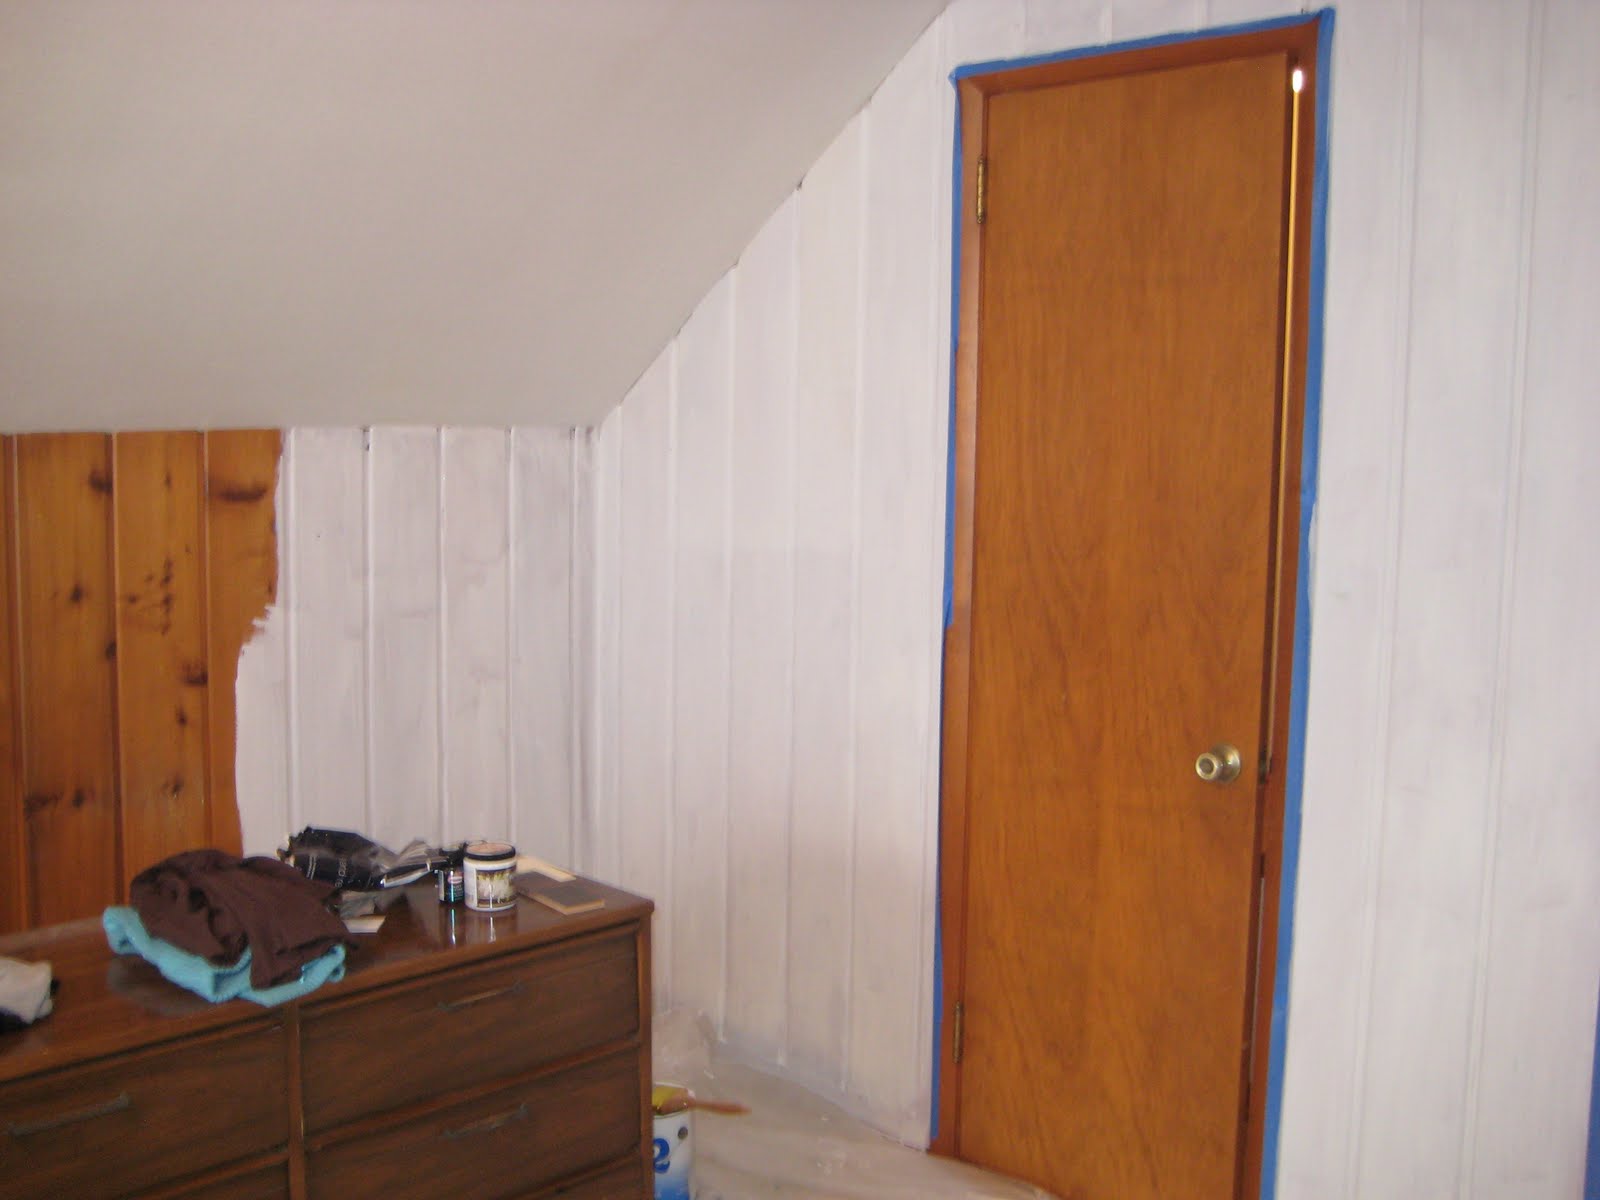 Free Download Painting Over Knotty Pine Paneling Complete